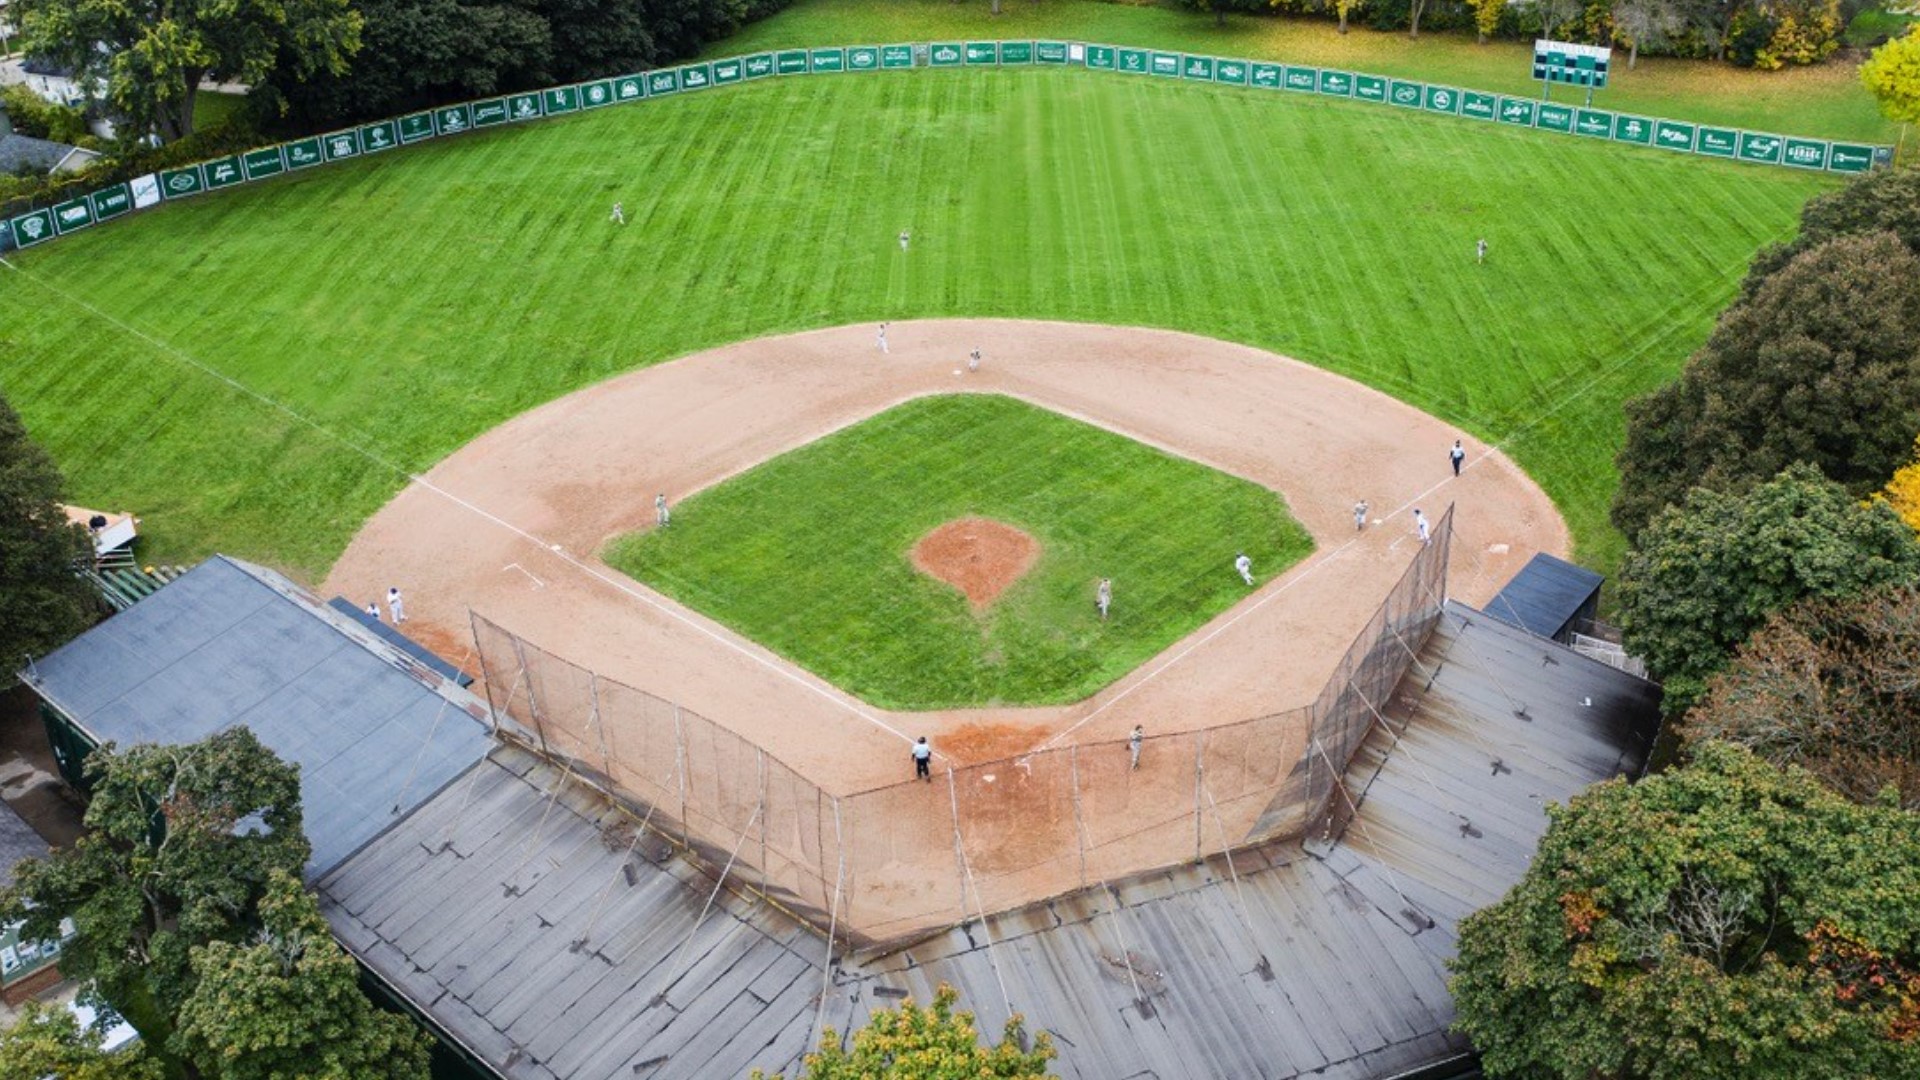 The city has entered into a contract with Rockford Construction to do the renovations on Sullivan Field, formerly known as Valley Field.